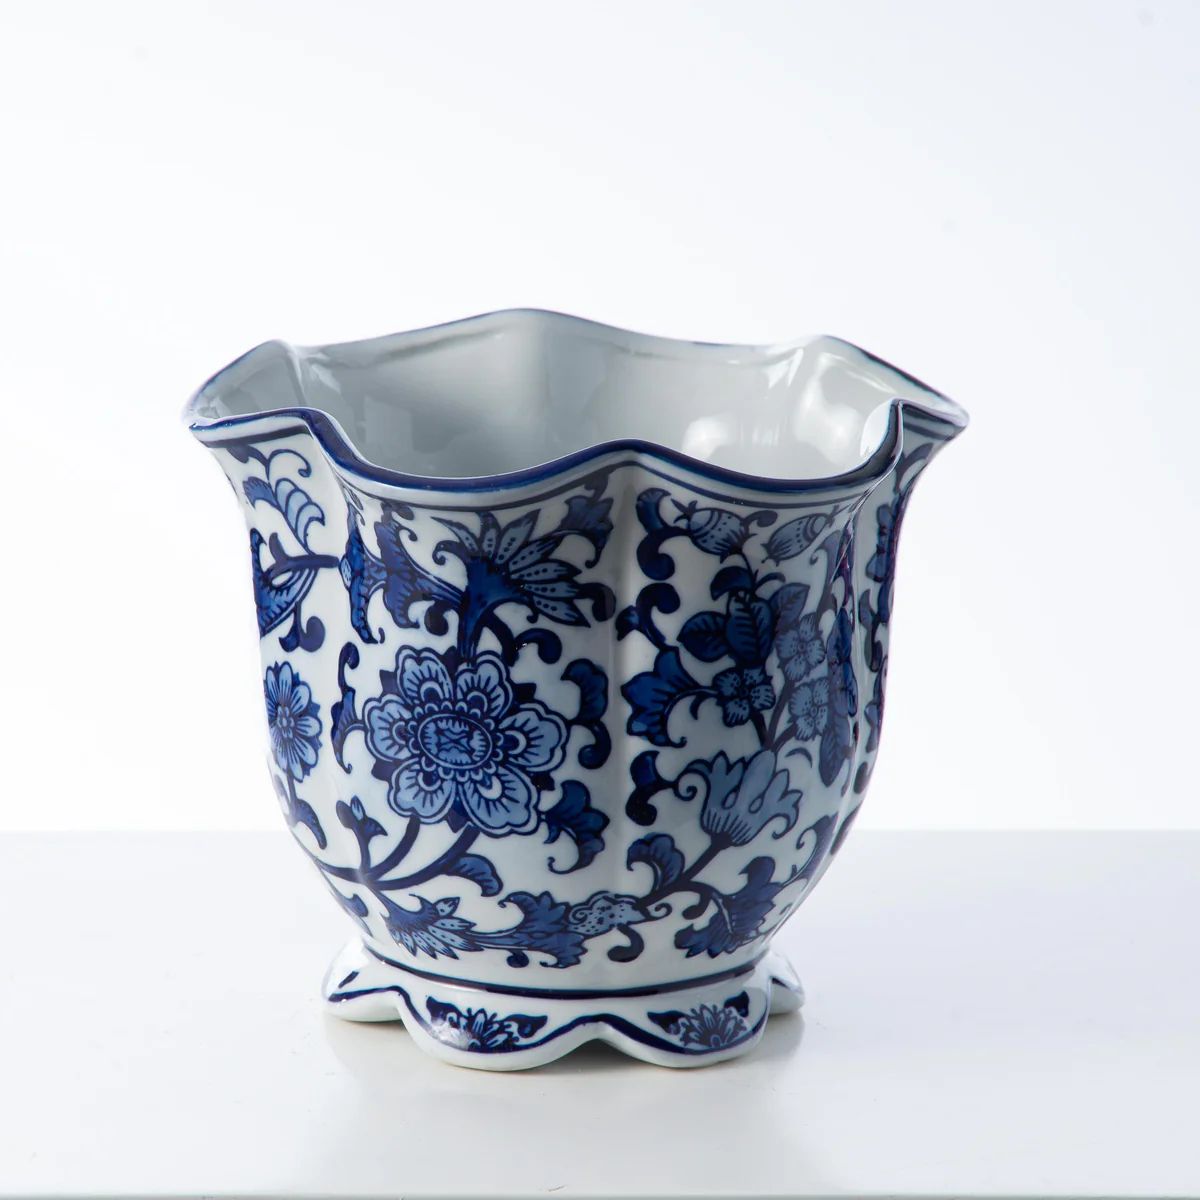 Blue & White Porcelain Chinoiserie Jardiniere Pot | Darby Creek Trading